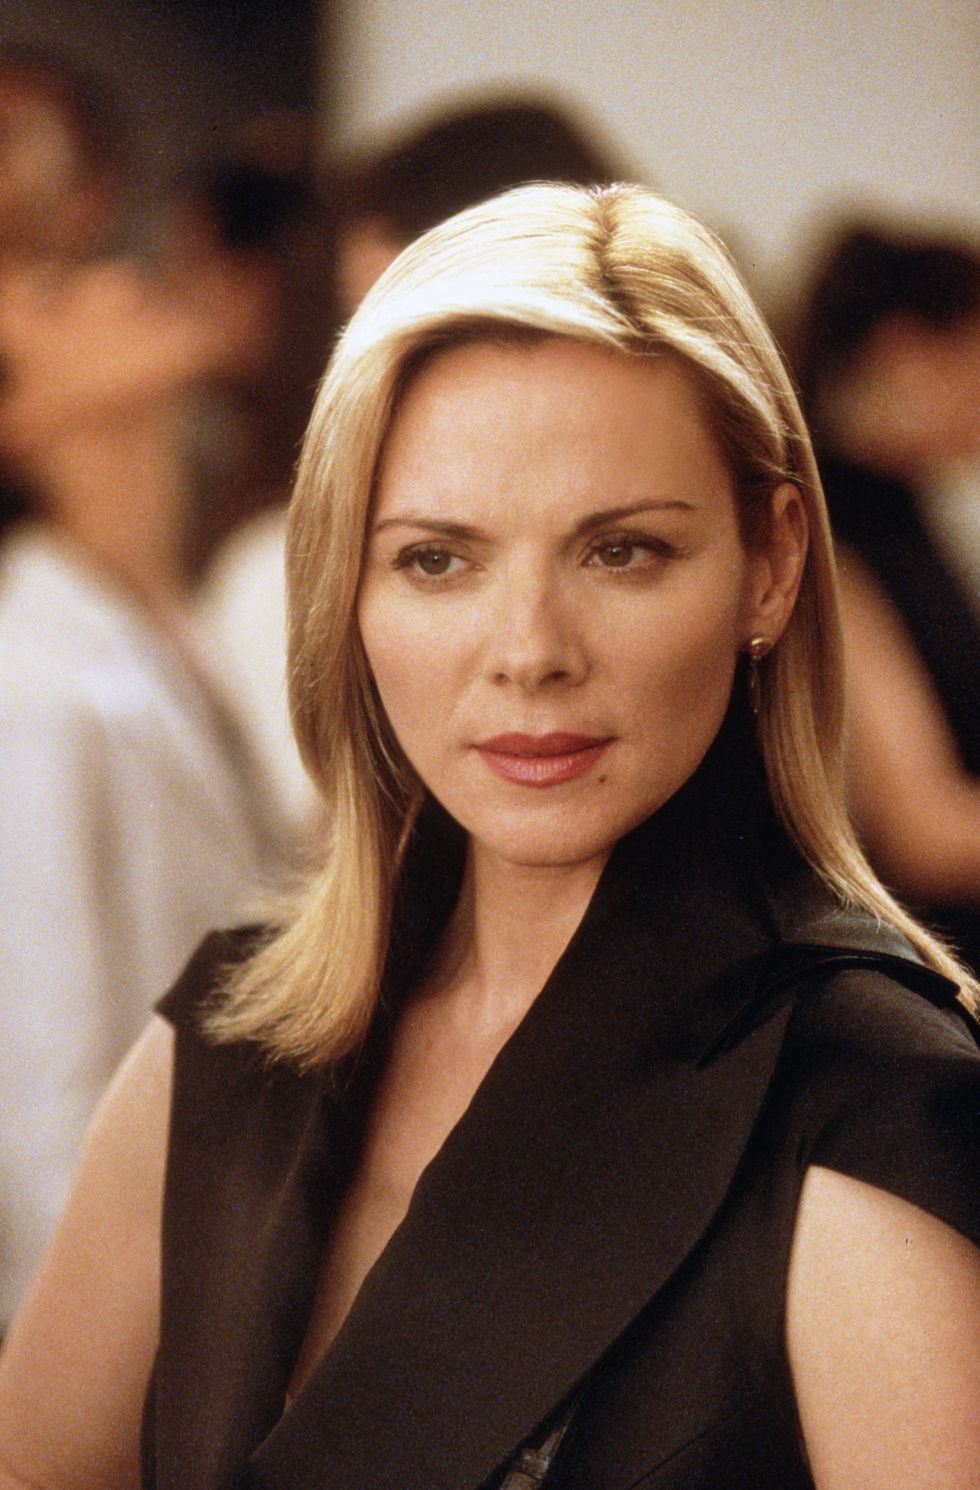 382260 07 kim cattrall stars in the comedy series sex and the city now in its third season photo by getty images